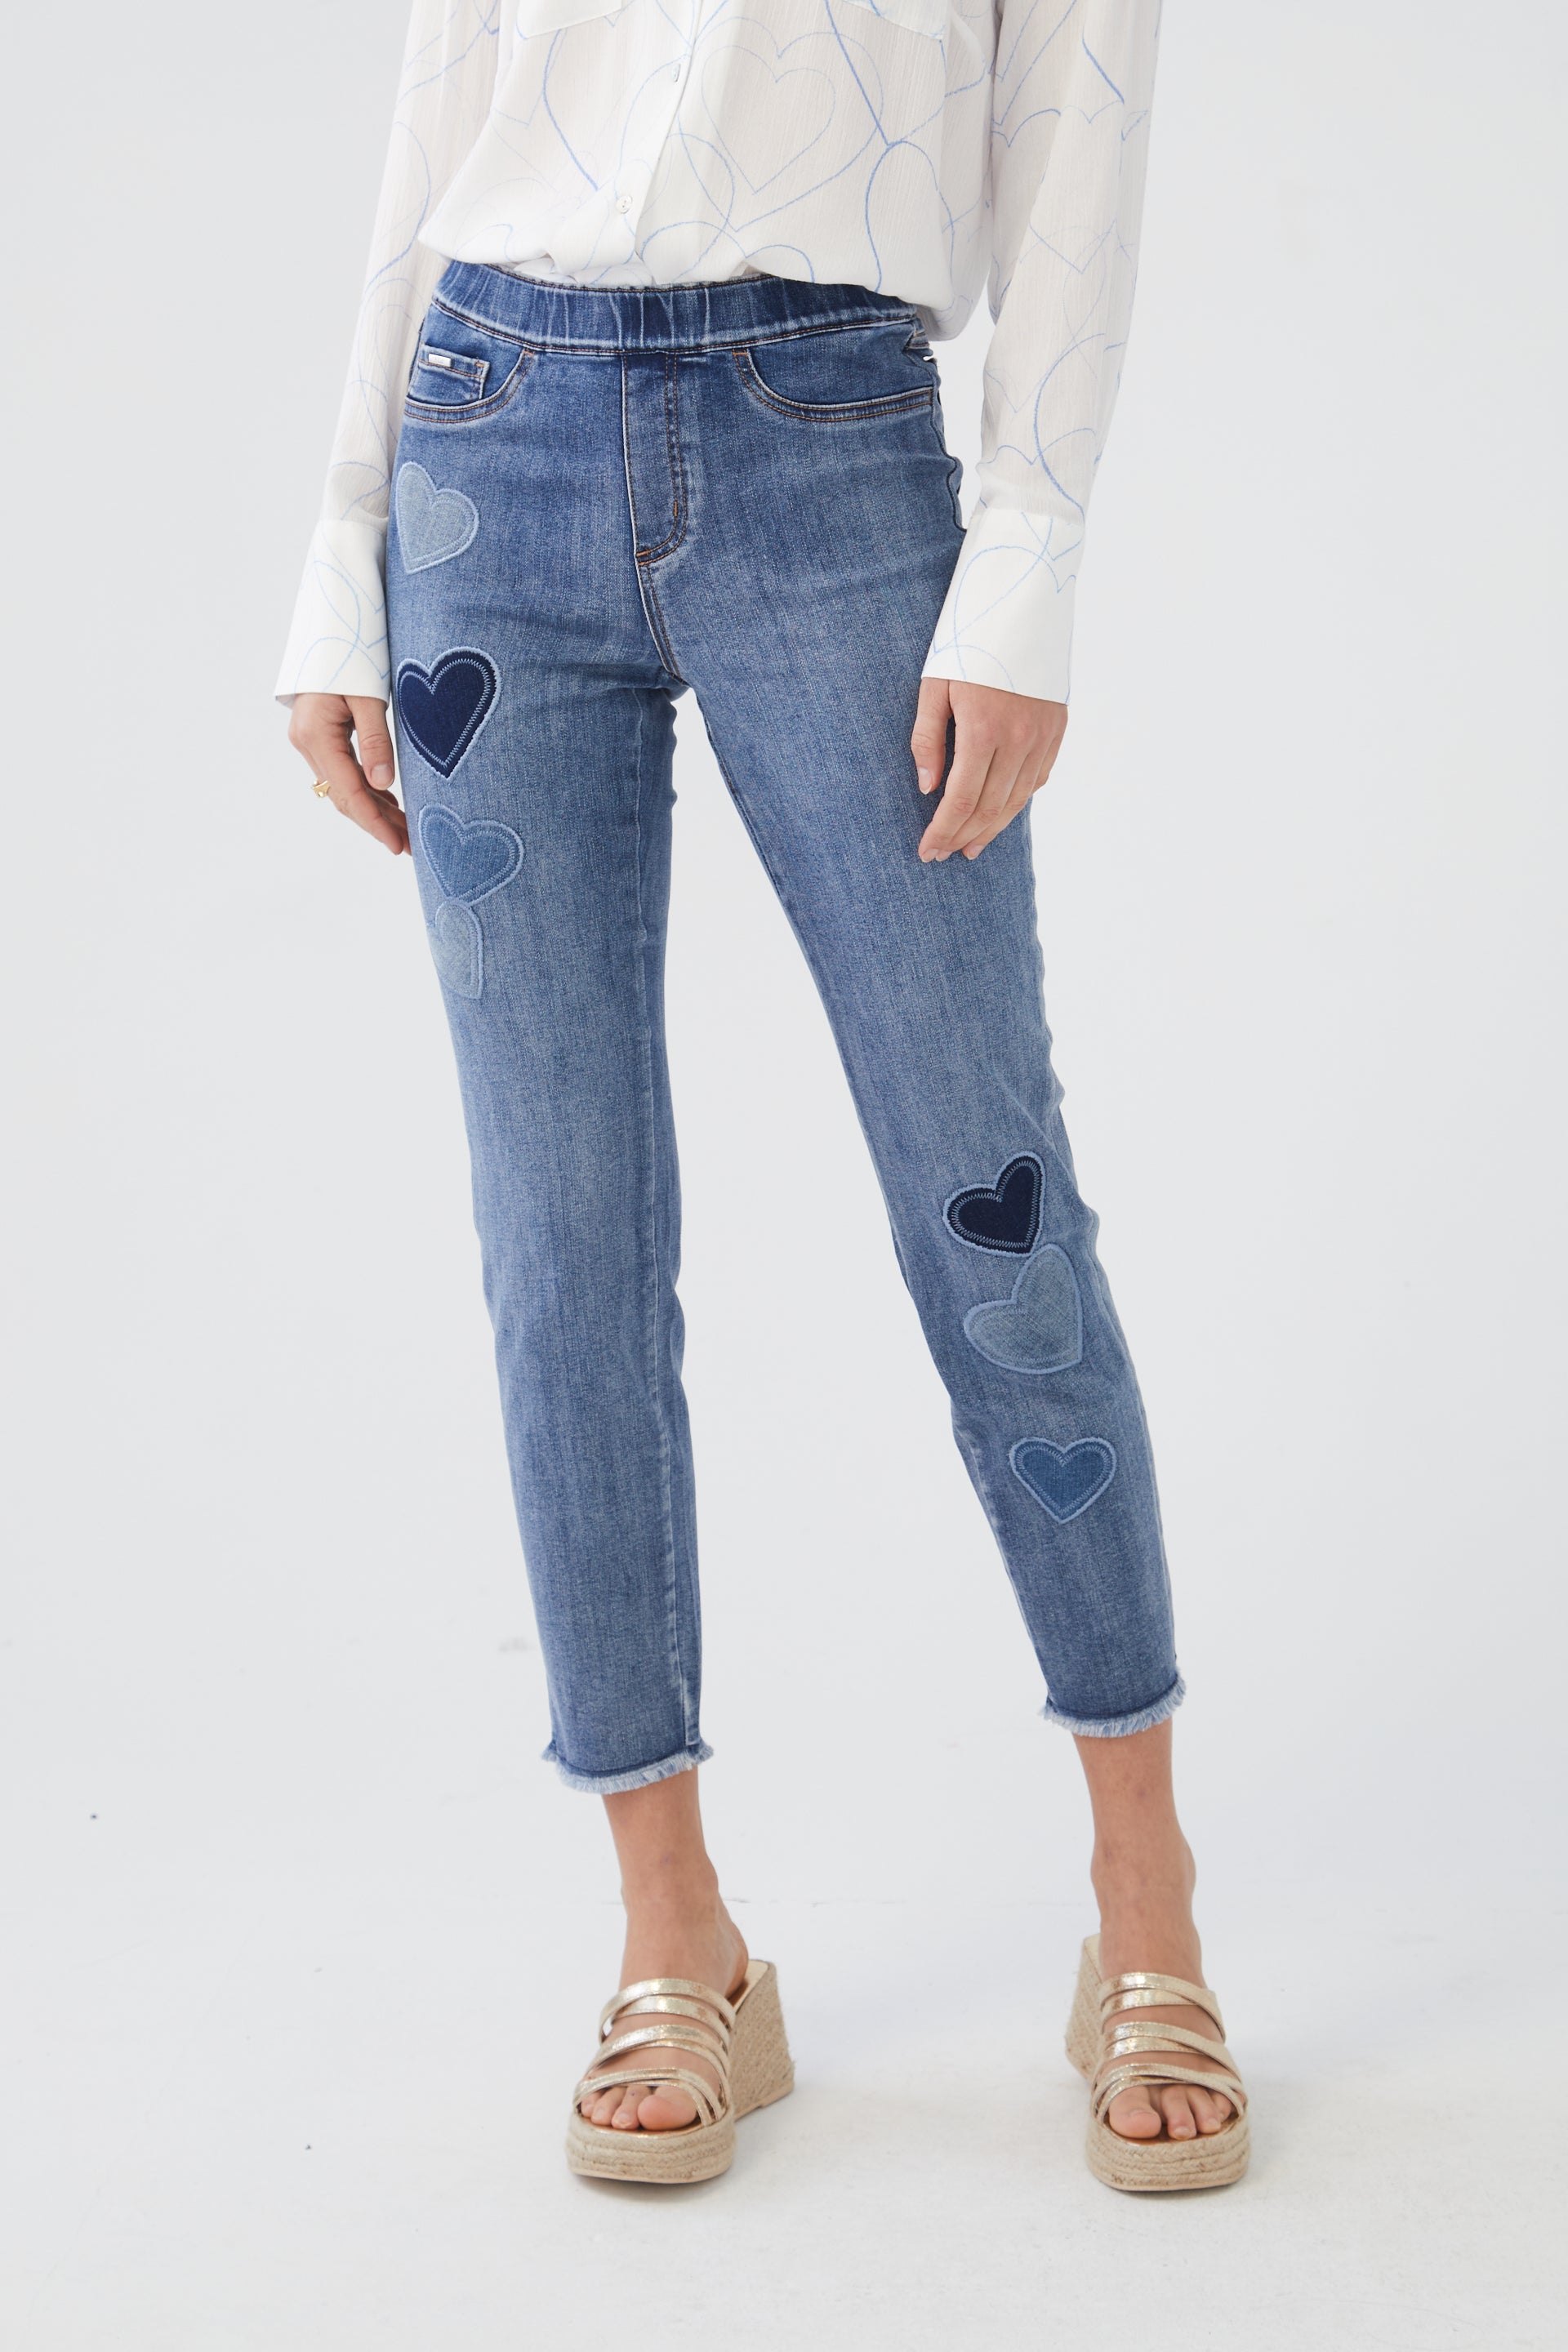 Heart Applique Pull-on Ankle Jeans by FDJ – MeadowCreek Clothiers